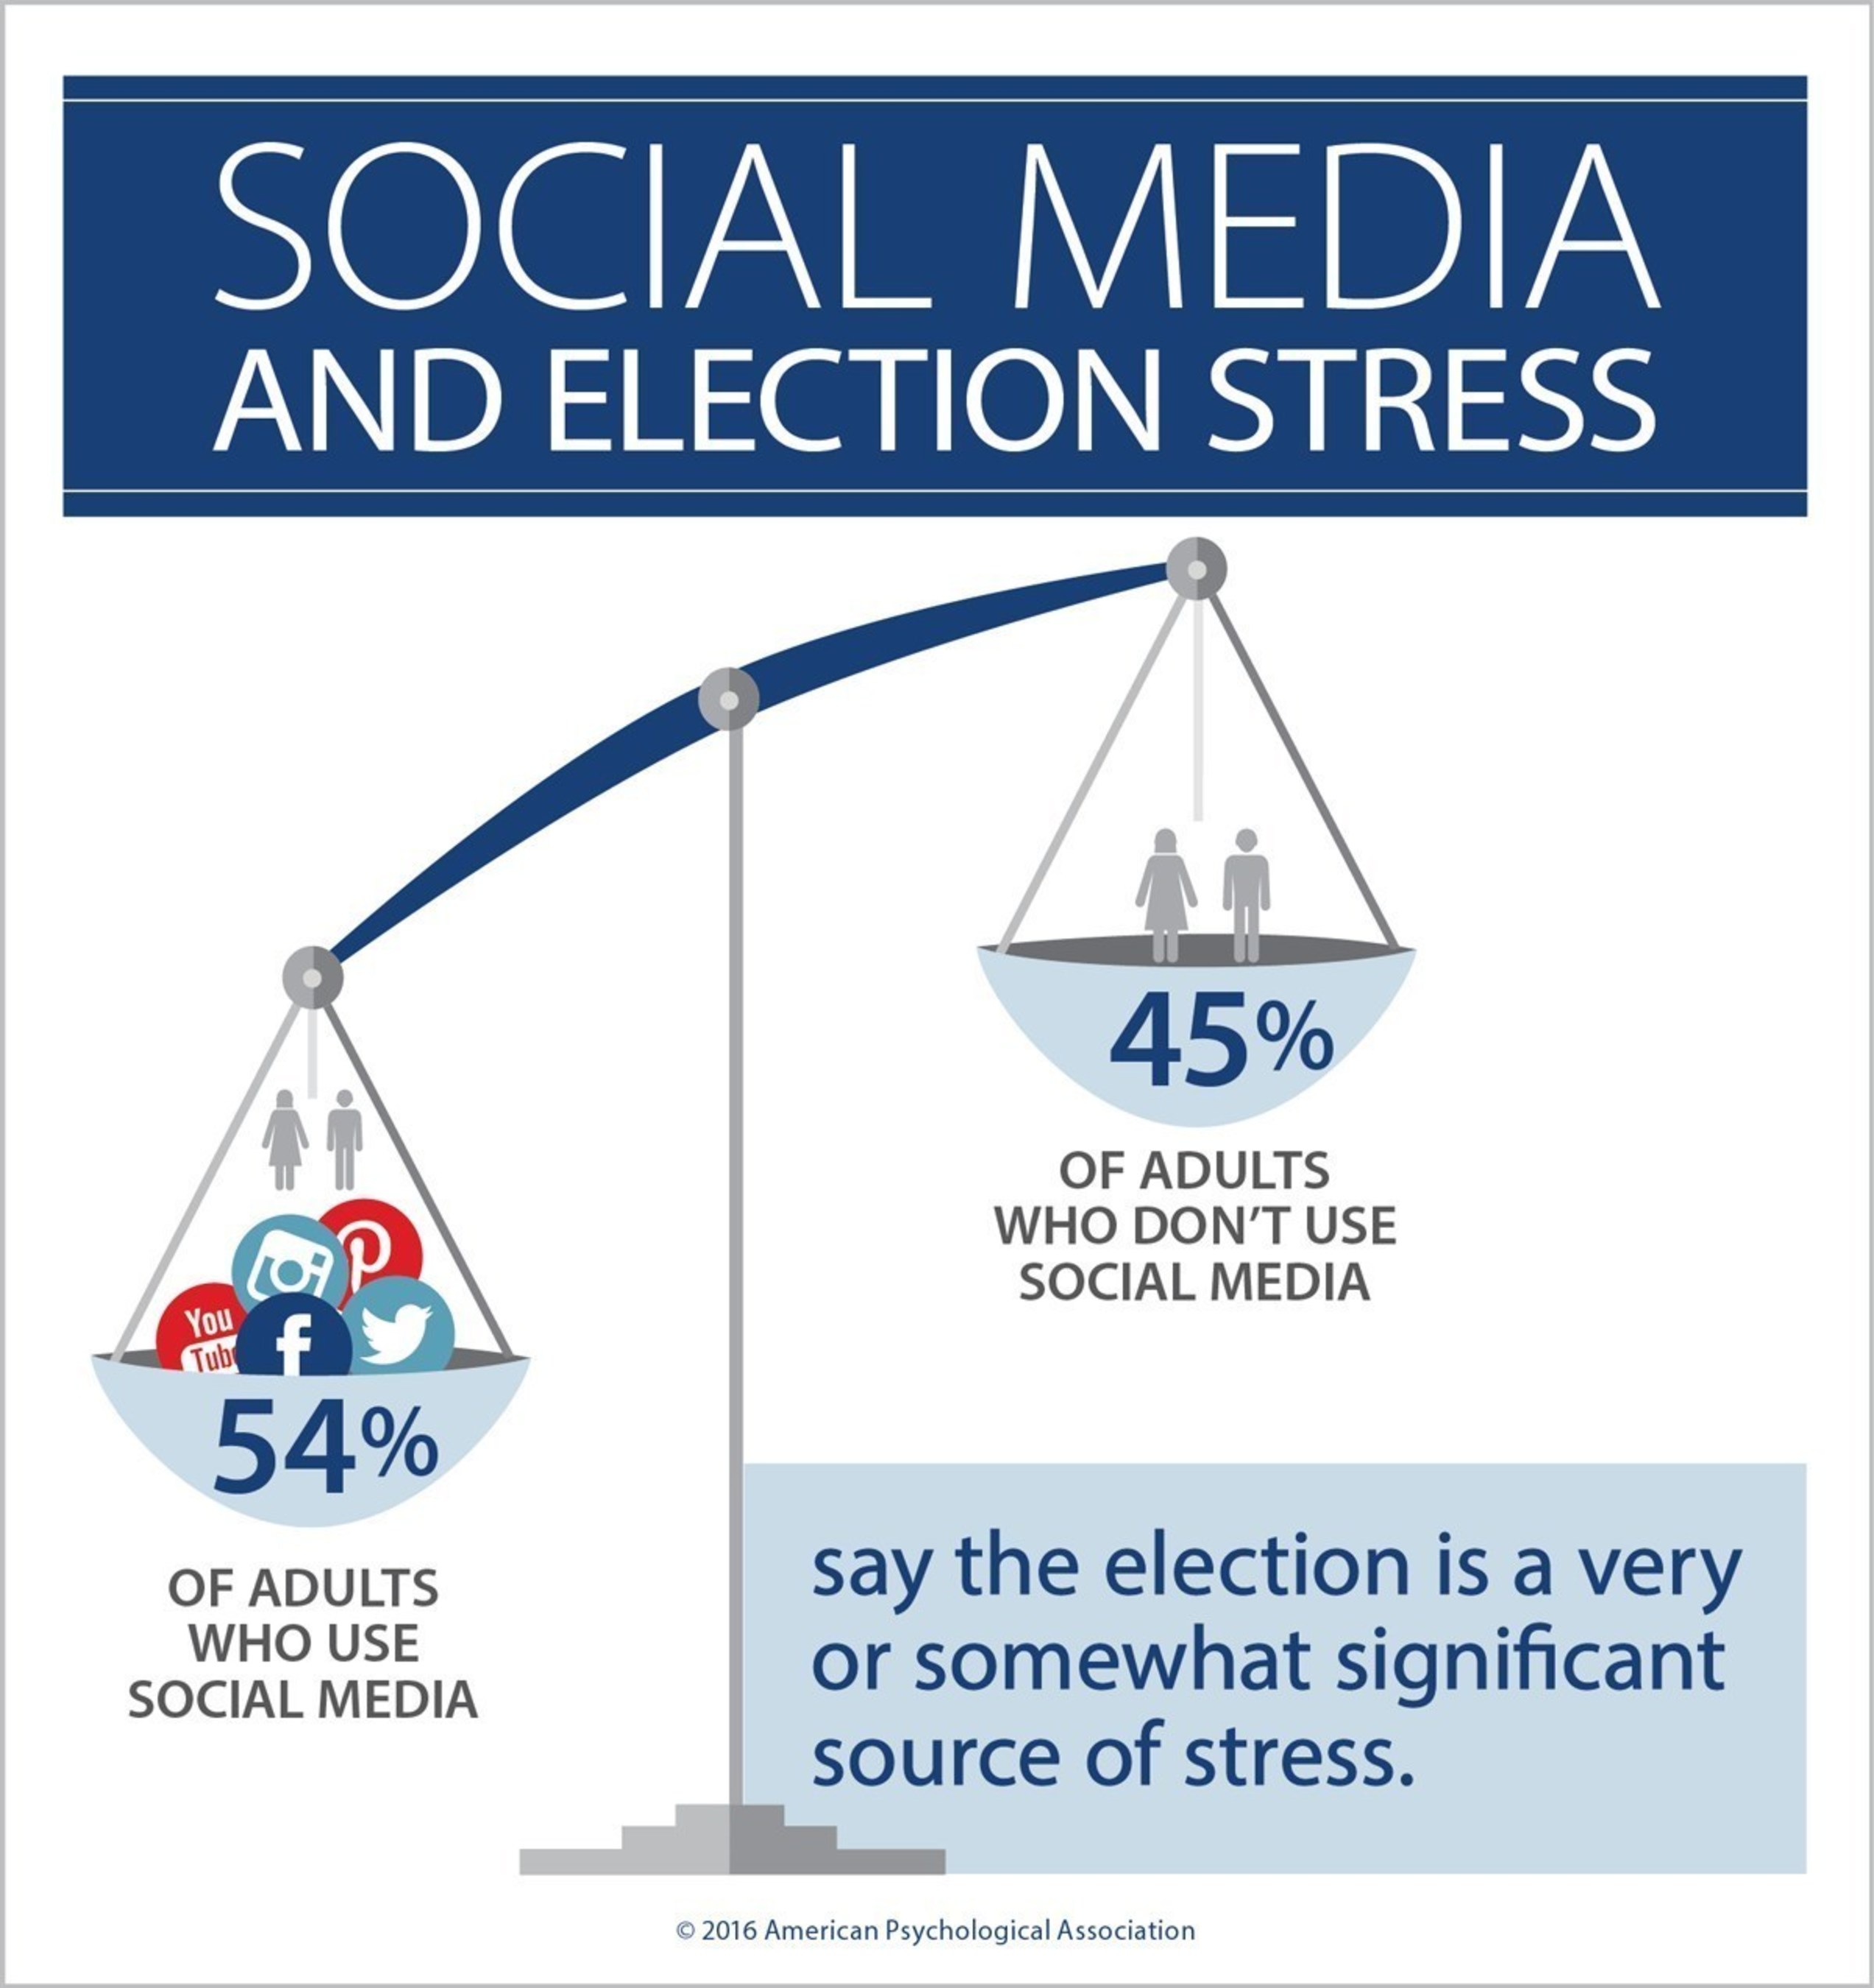 A majority of Americans say that the 2016 presidential election is causing them stress, but social media users are more likely to say the election is a source of stress than those who do not use social media.